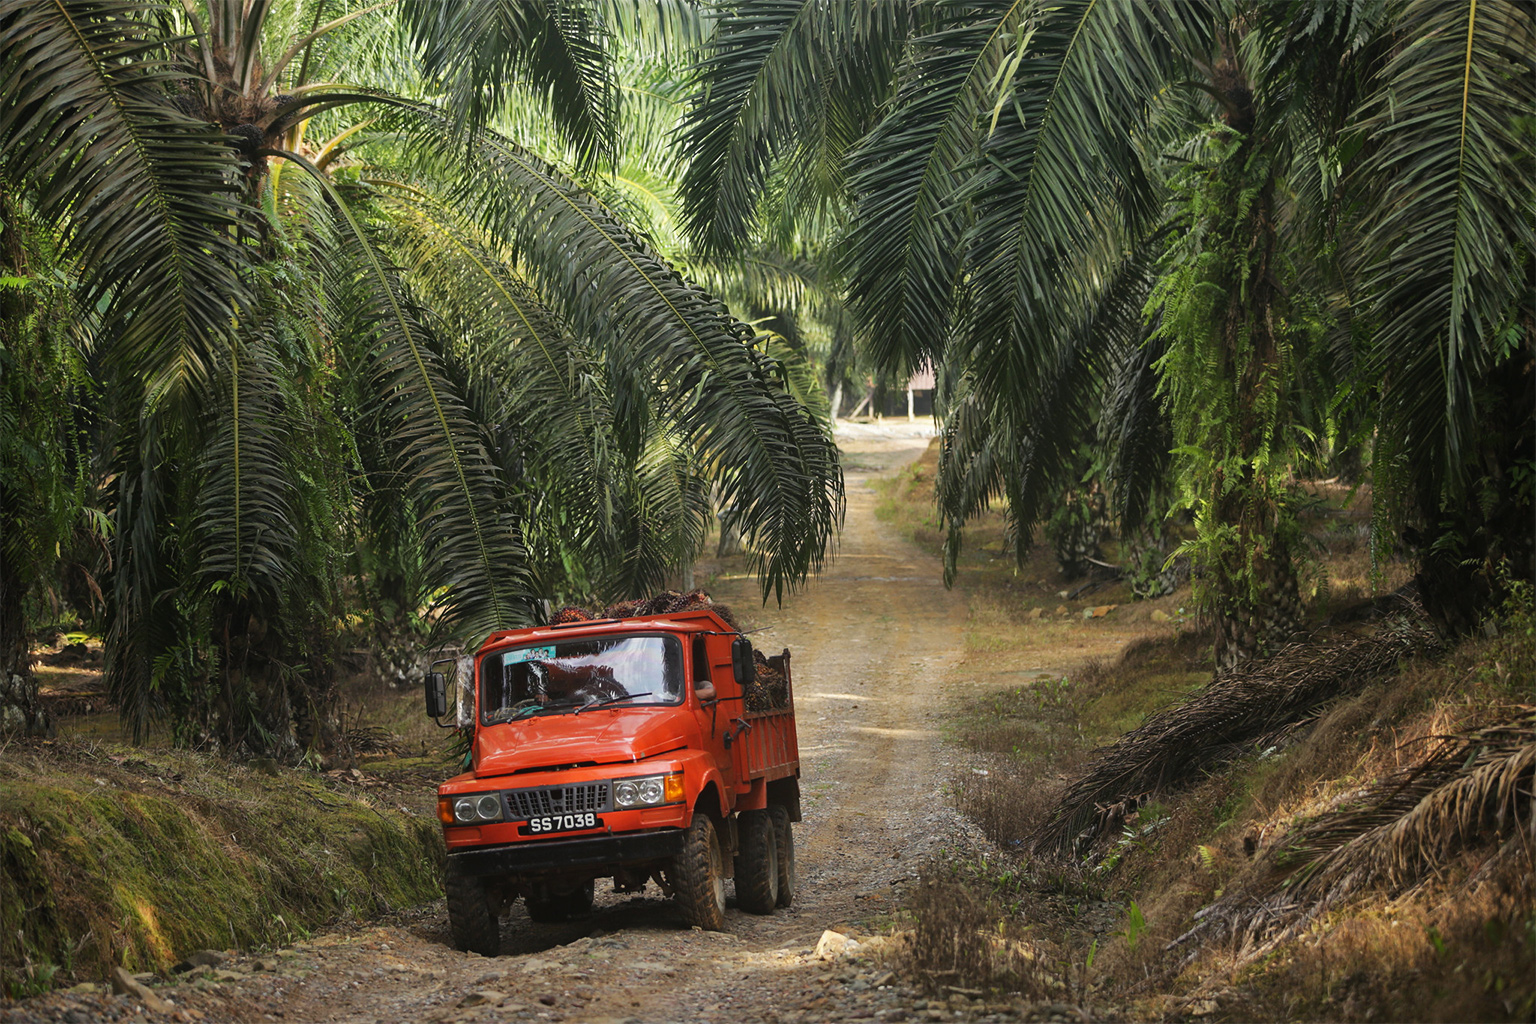 A truck transporting harvested oil palms, Sabah.